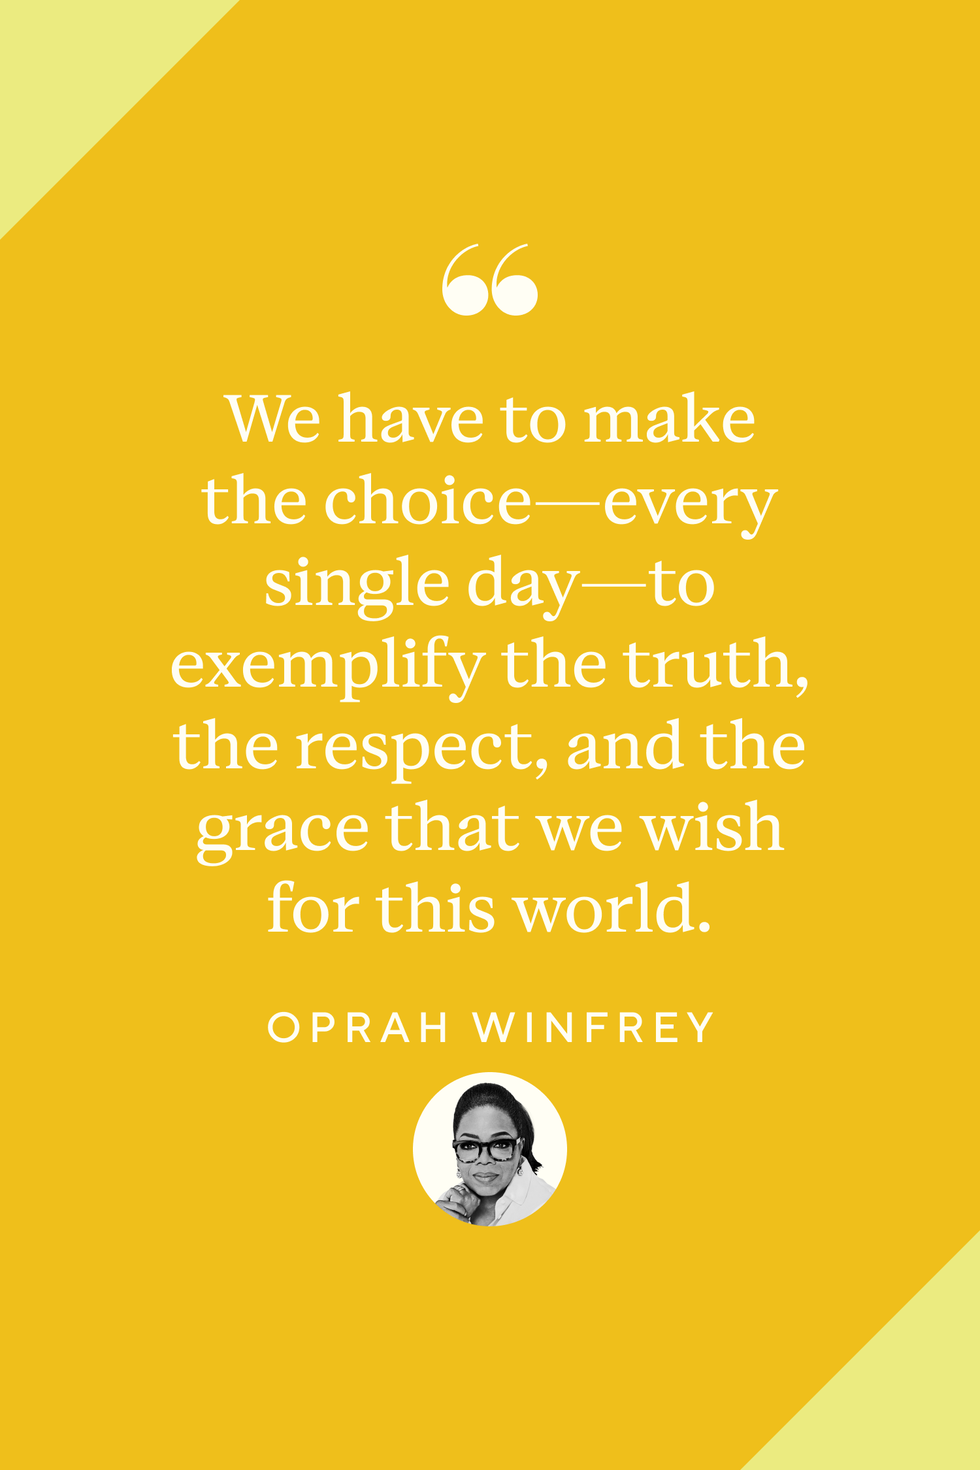 30 Empowering Oprah Quotes on Love, Happiness, and Success